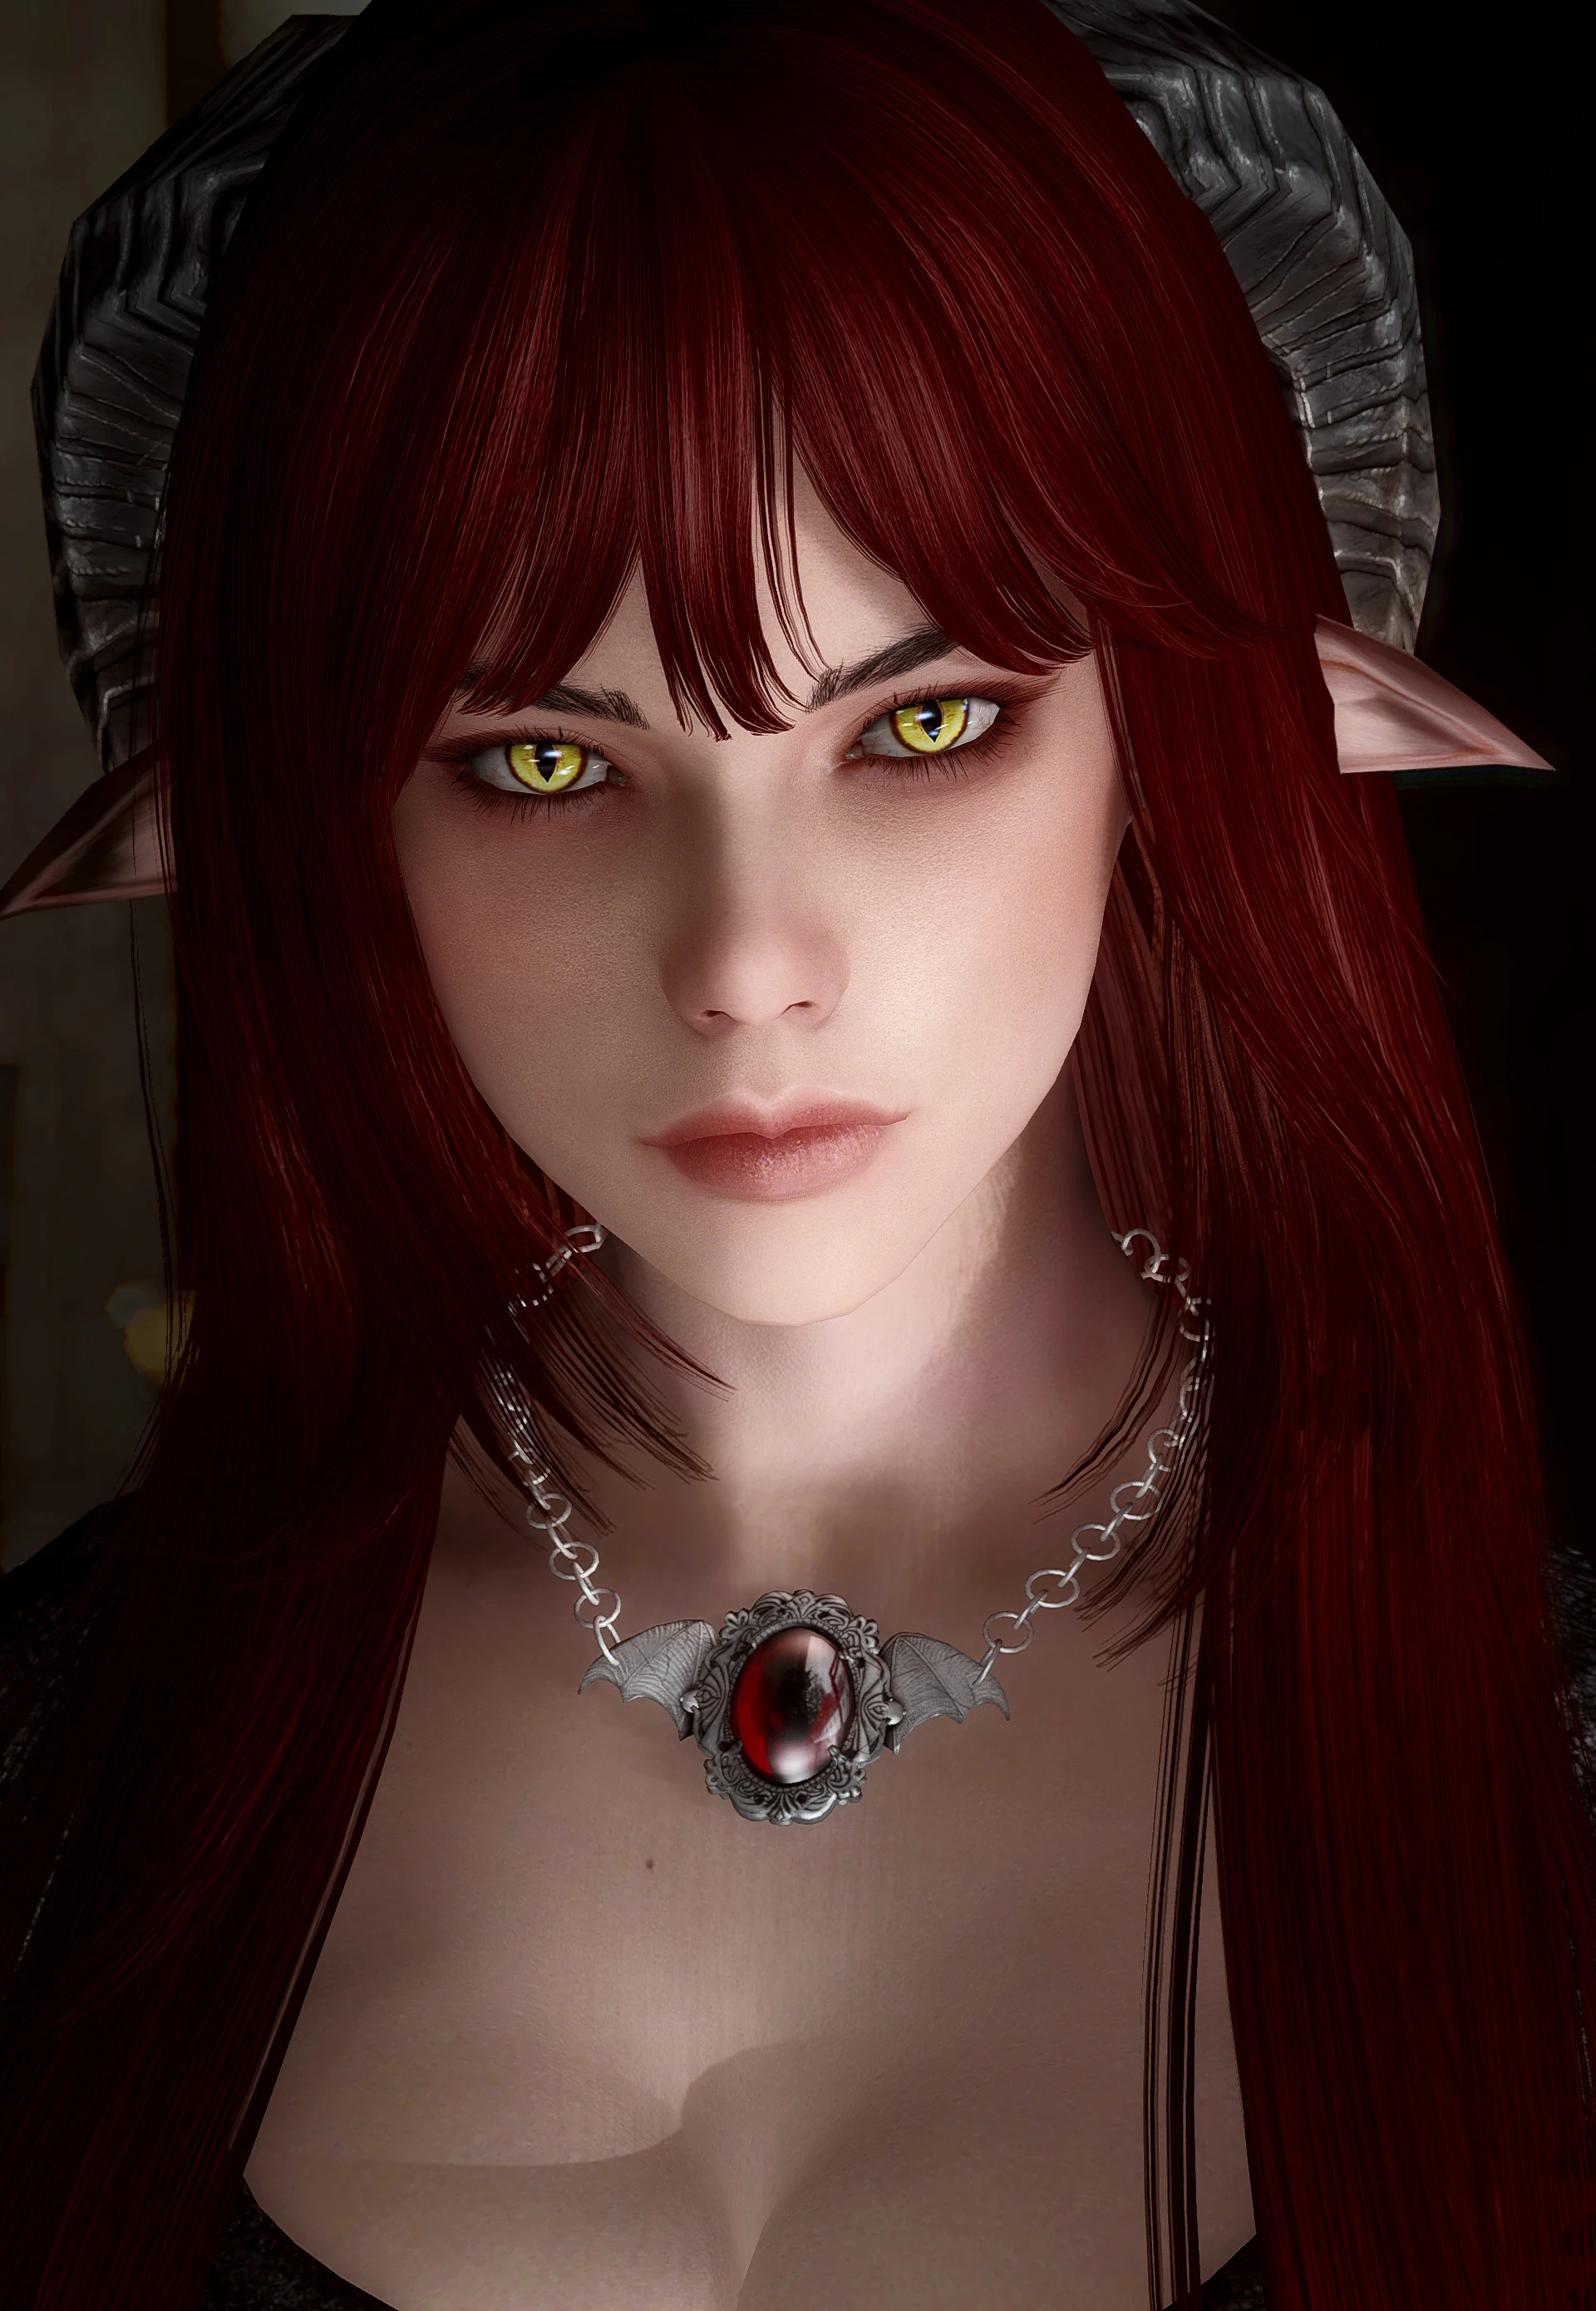 Succubus-san by rxkx22 - Ported to SSE by bchick3 at Skyrim Special. 